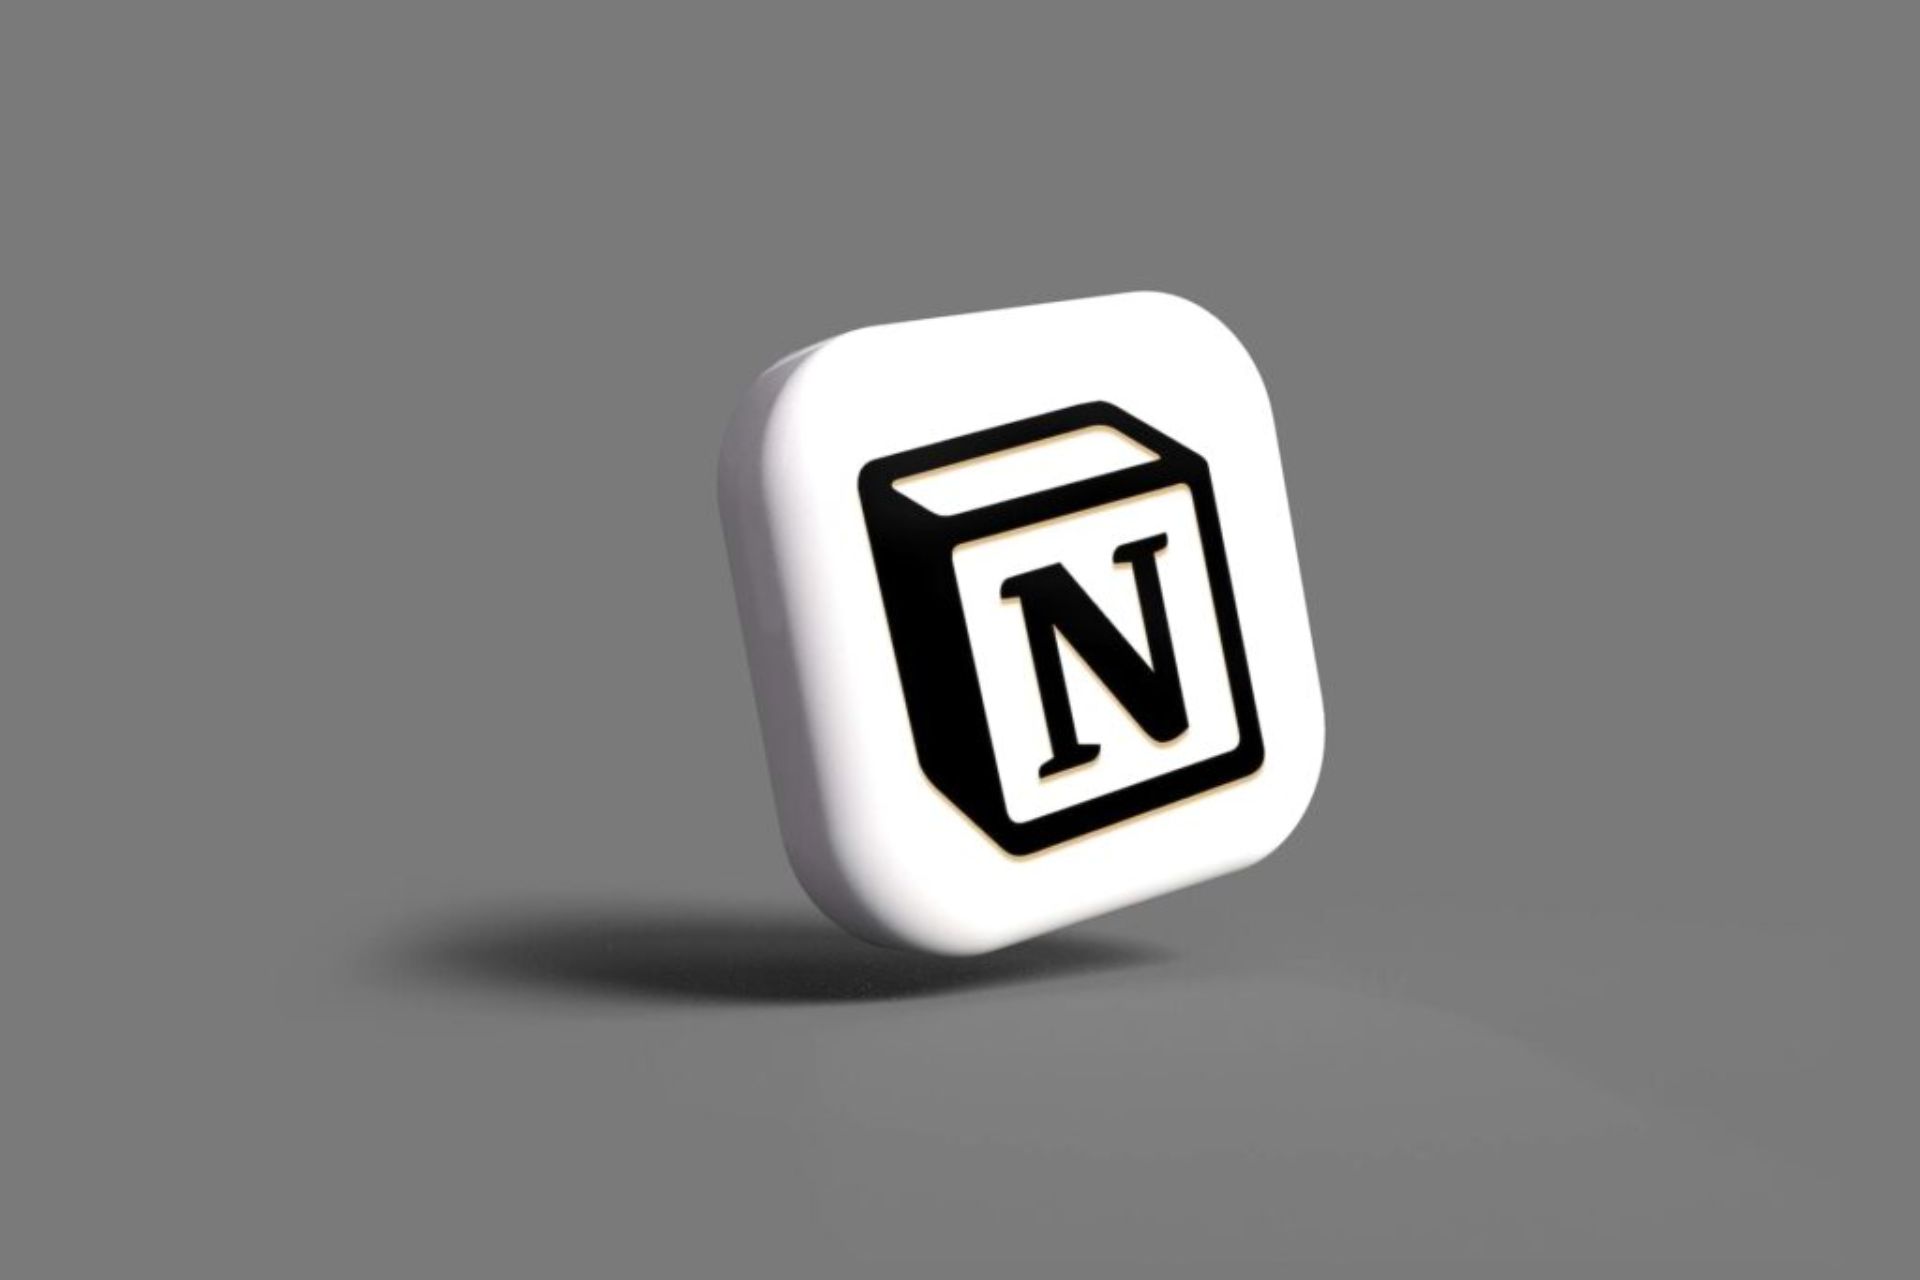 a 3D render of Notion's logo